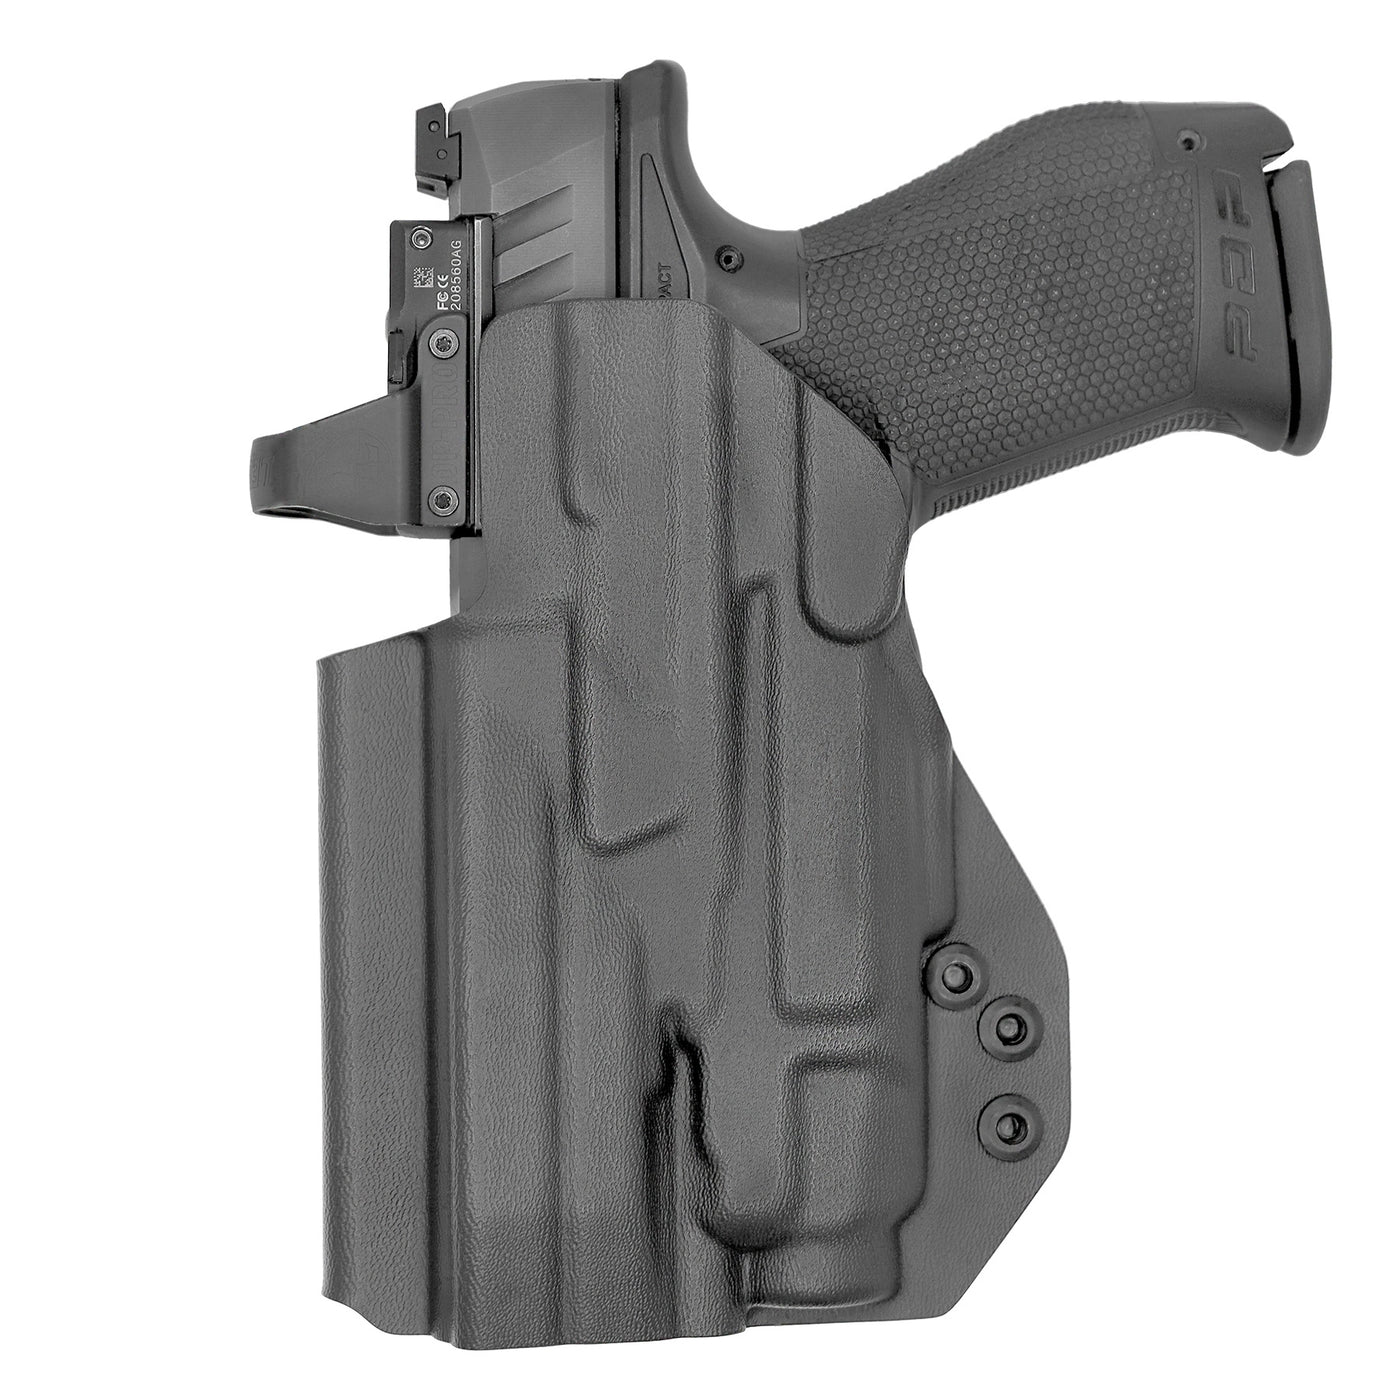 C&G Holsters Quickship IWB Tactical M&P 9/40 Streamlight TLR7/A in holstered position back view